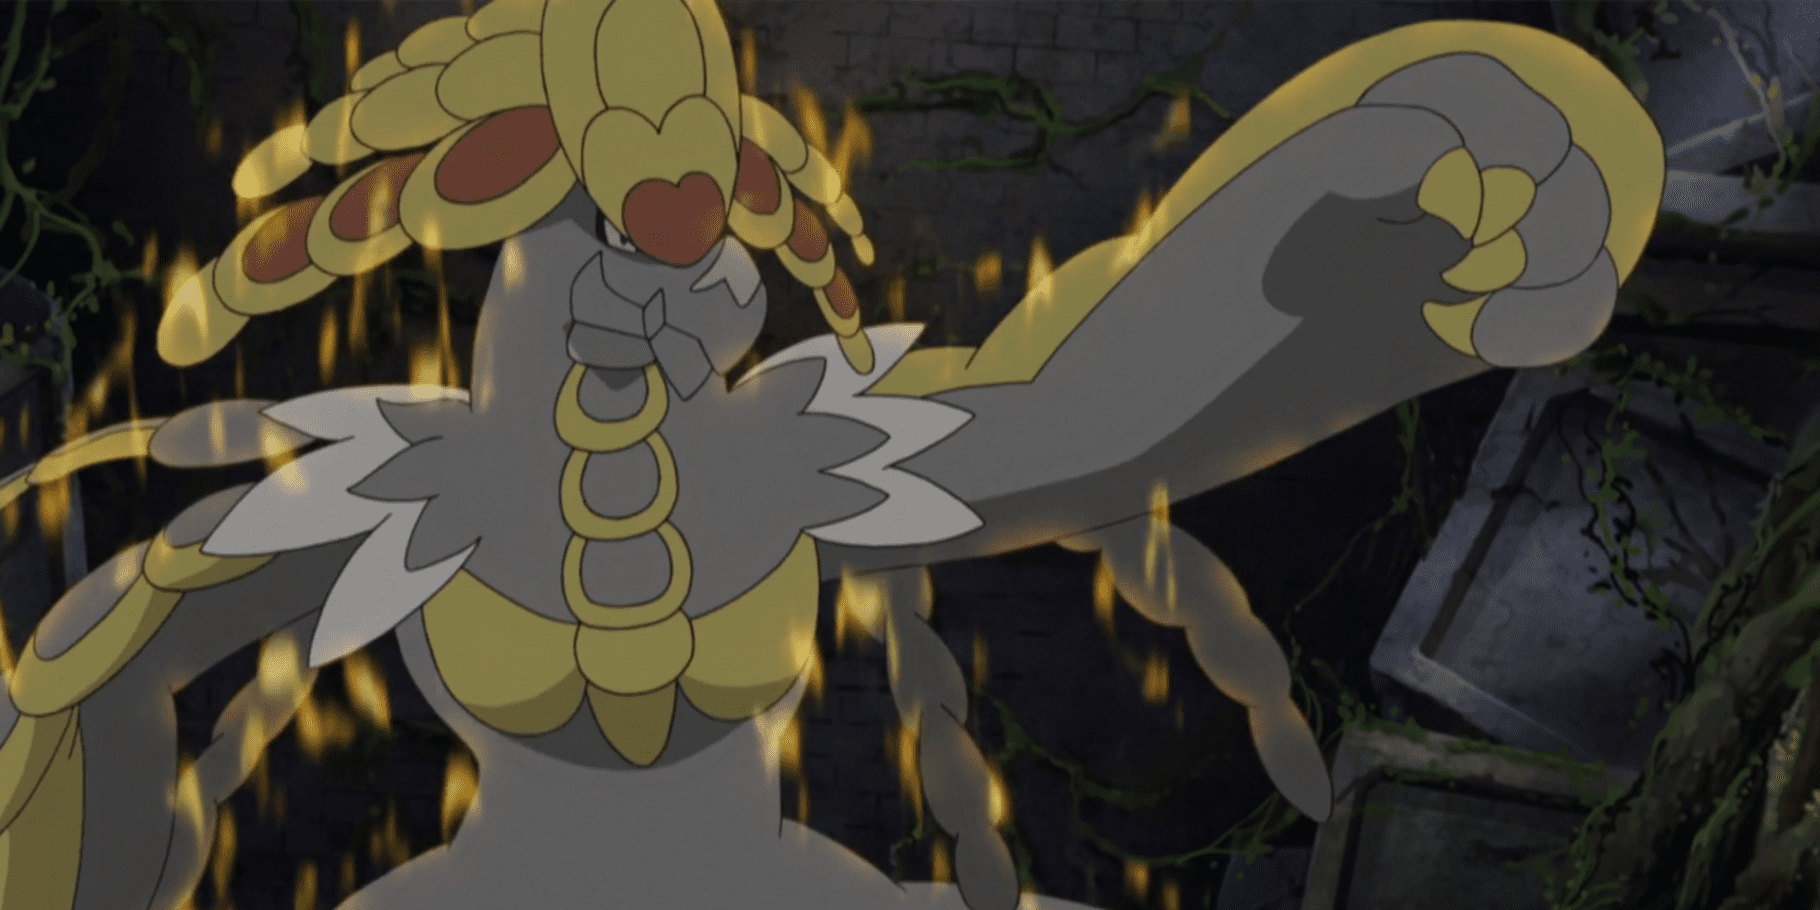 Kommo-o stretches one of its arms in the Pokemon anime series.